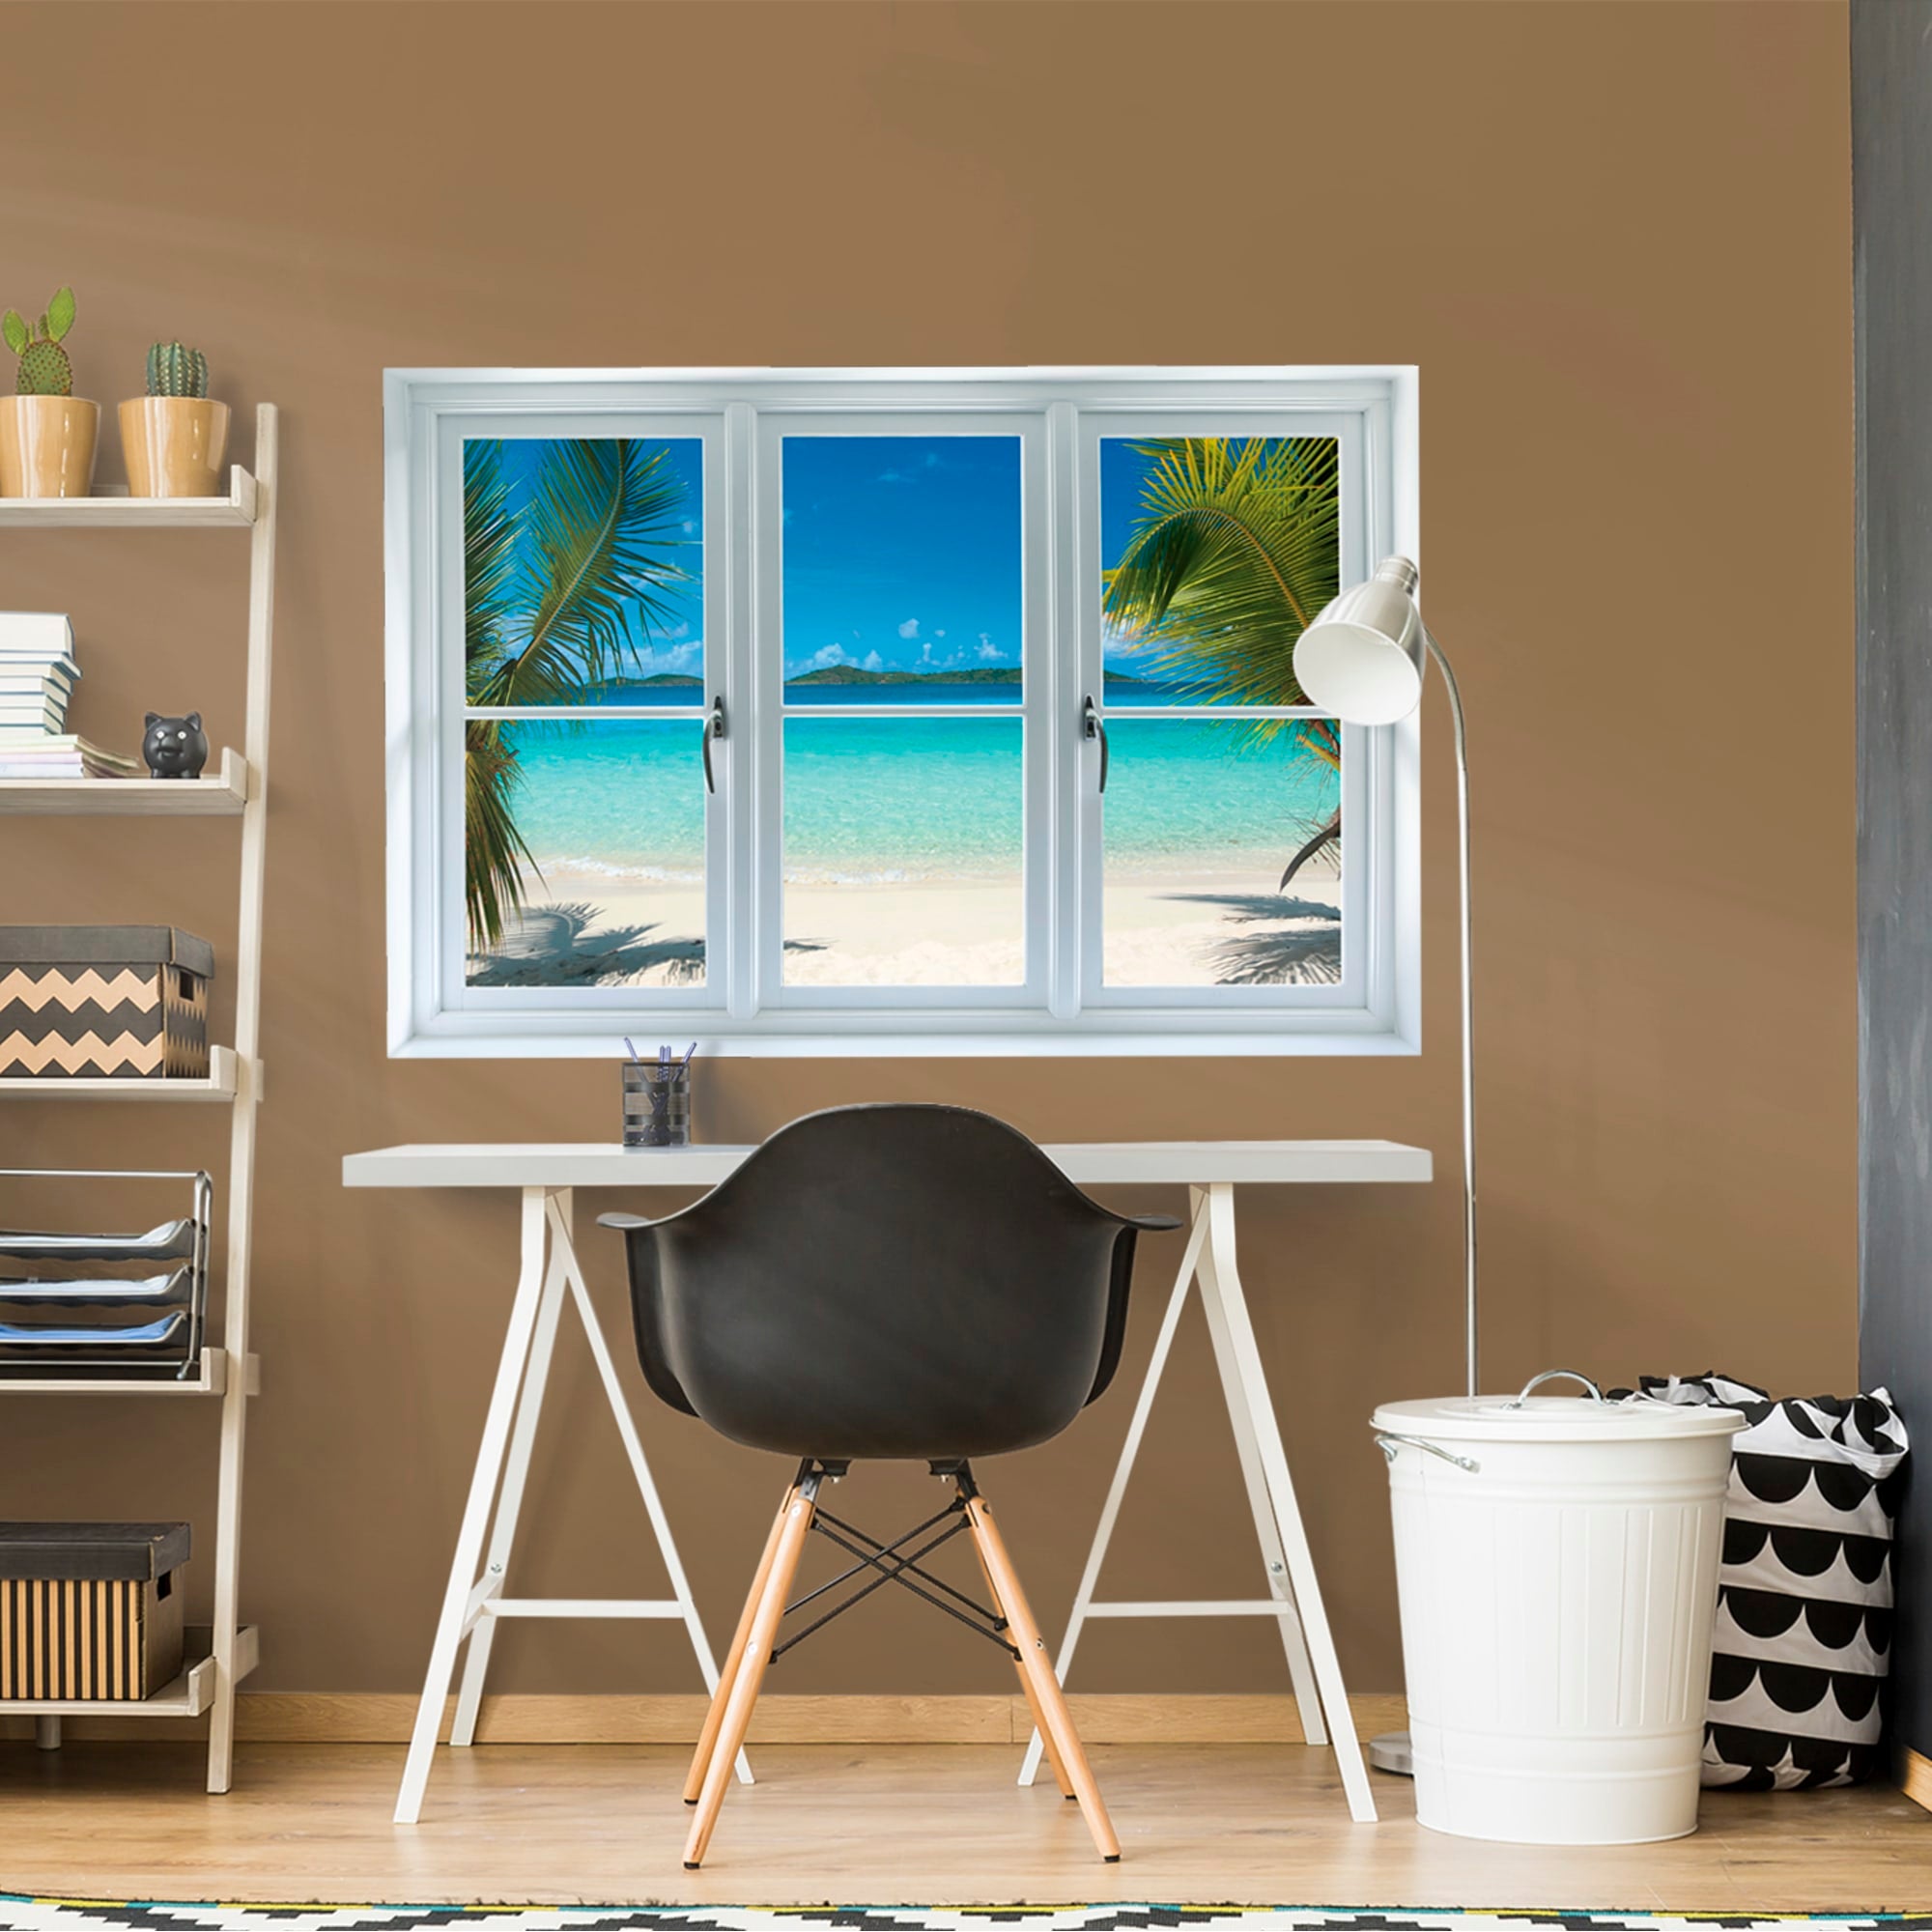 Instant Window: Virgin Islands Beach - Removable Wall Graphic 51.0"W x 34.0"H by Fathead | Vinyl